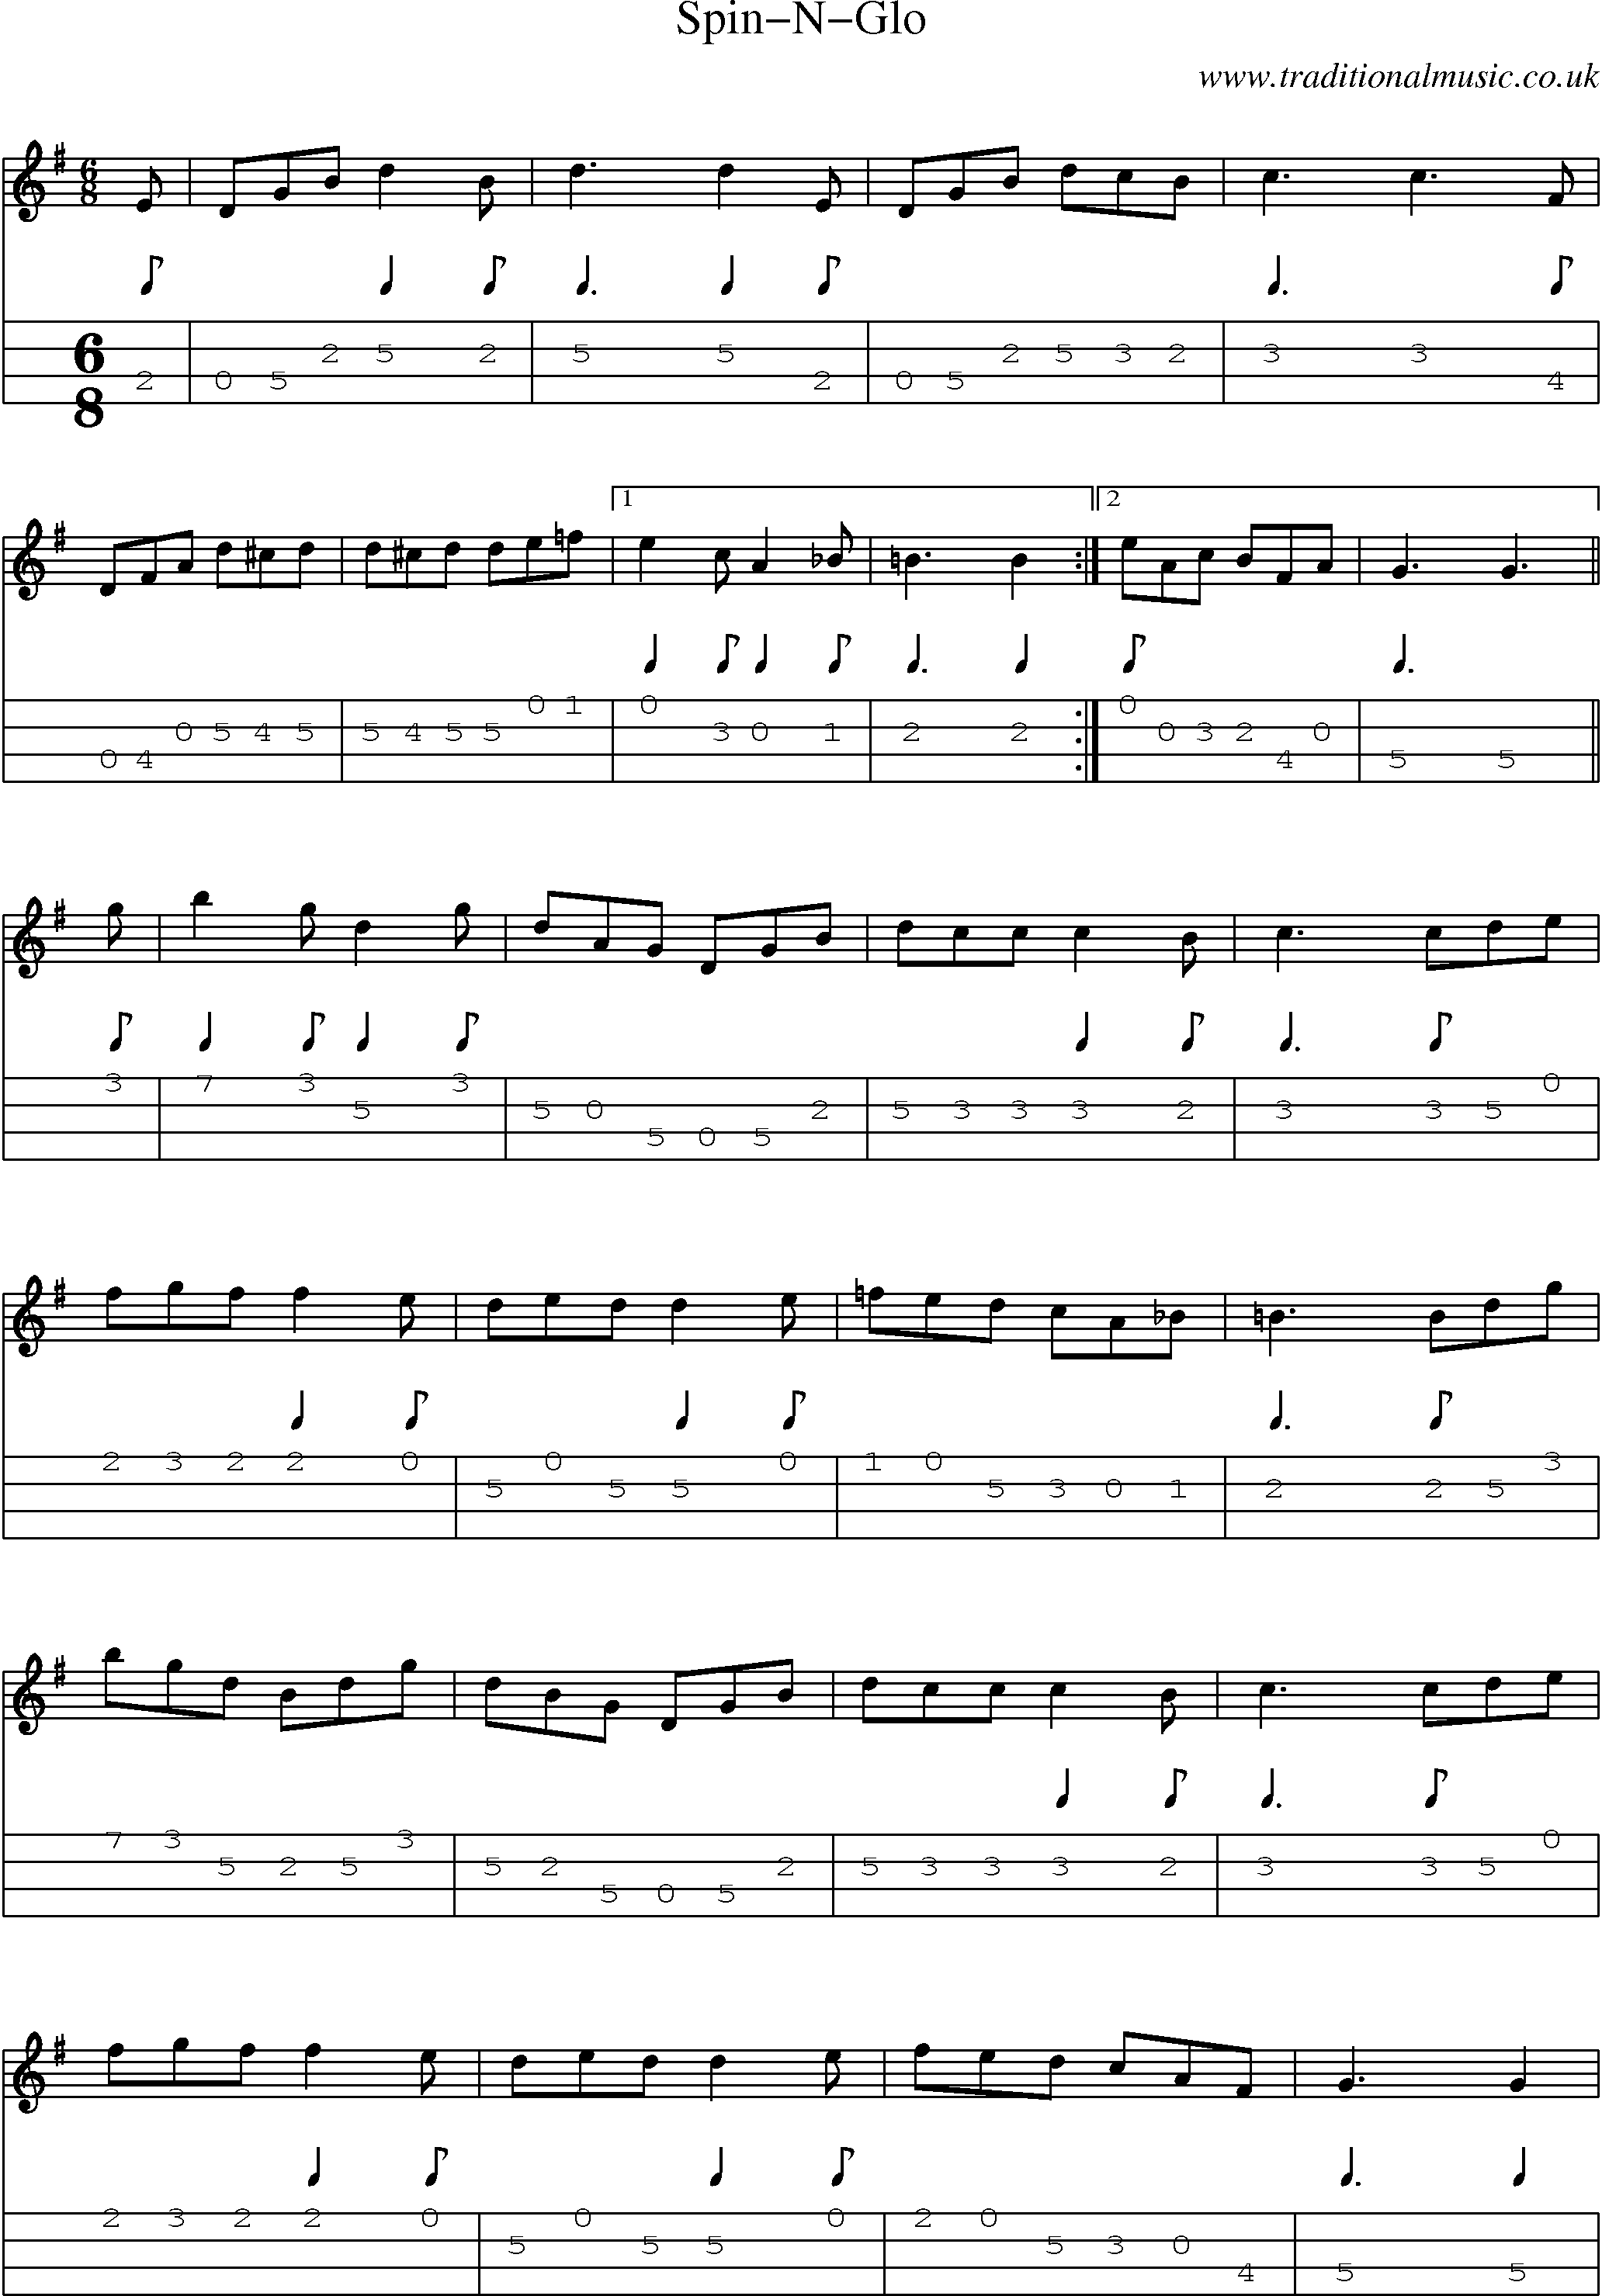 Music Score and Mandolin Tabs for Spinnglo